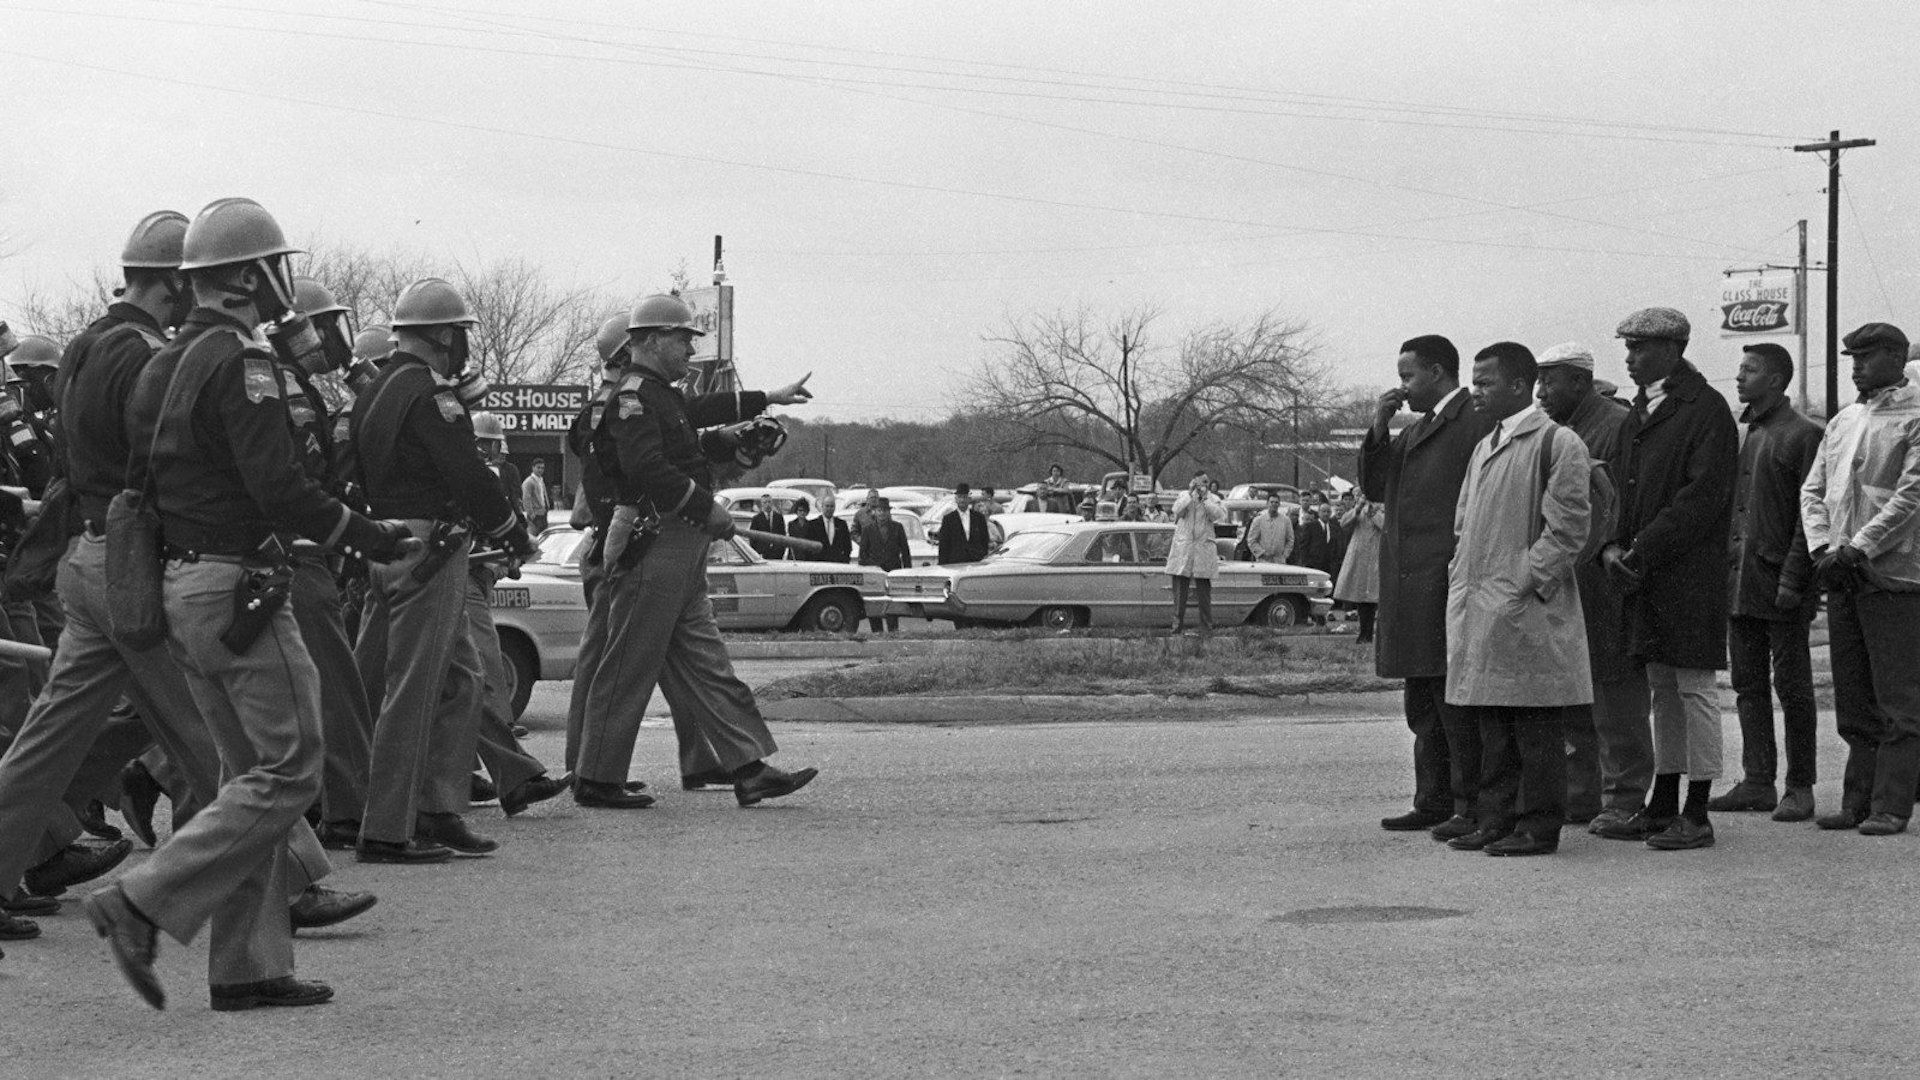 'Two Minute Warning.' Marchers face a line of state troopers in Selma, Alabama moments before police beat the protestors on 7 March, 1965. Photo by Spider Martin, courtesy of Magnolia Pictures.